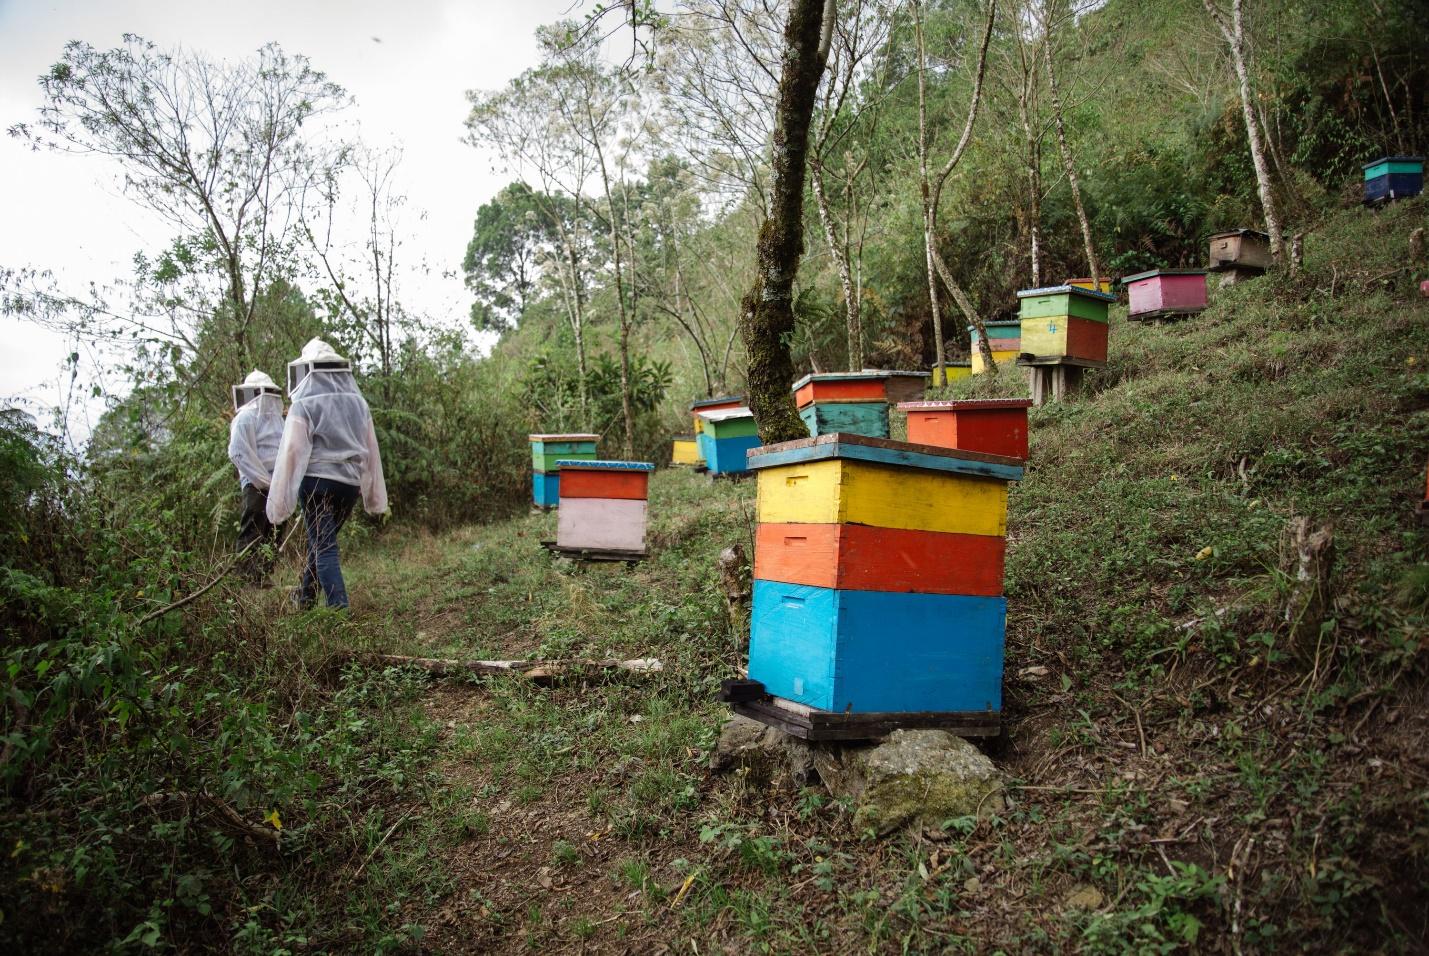 Hives from the beekeeping program at CESMACH cooperative